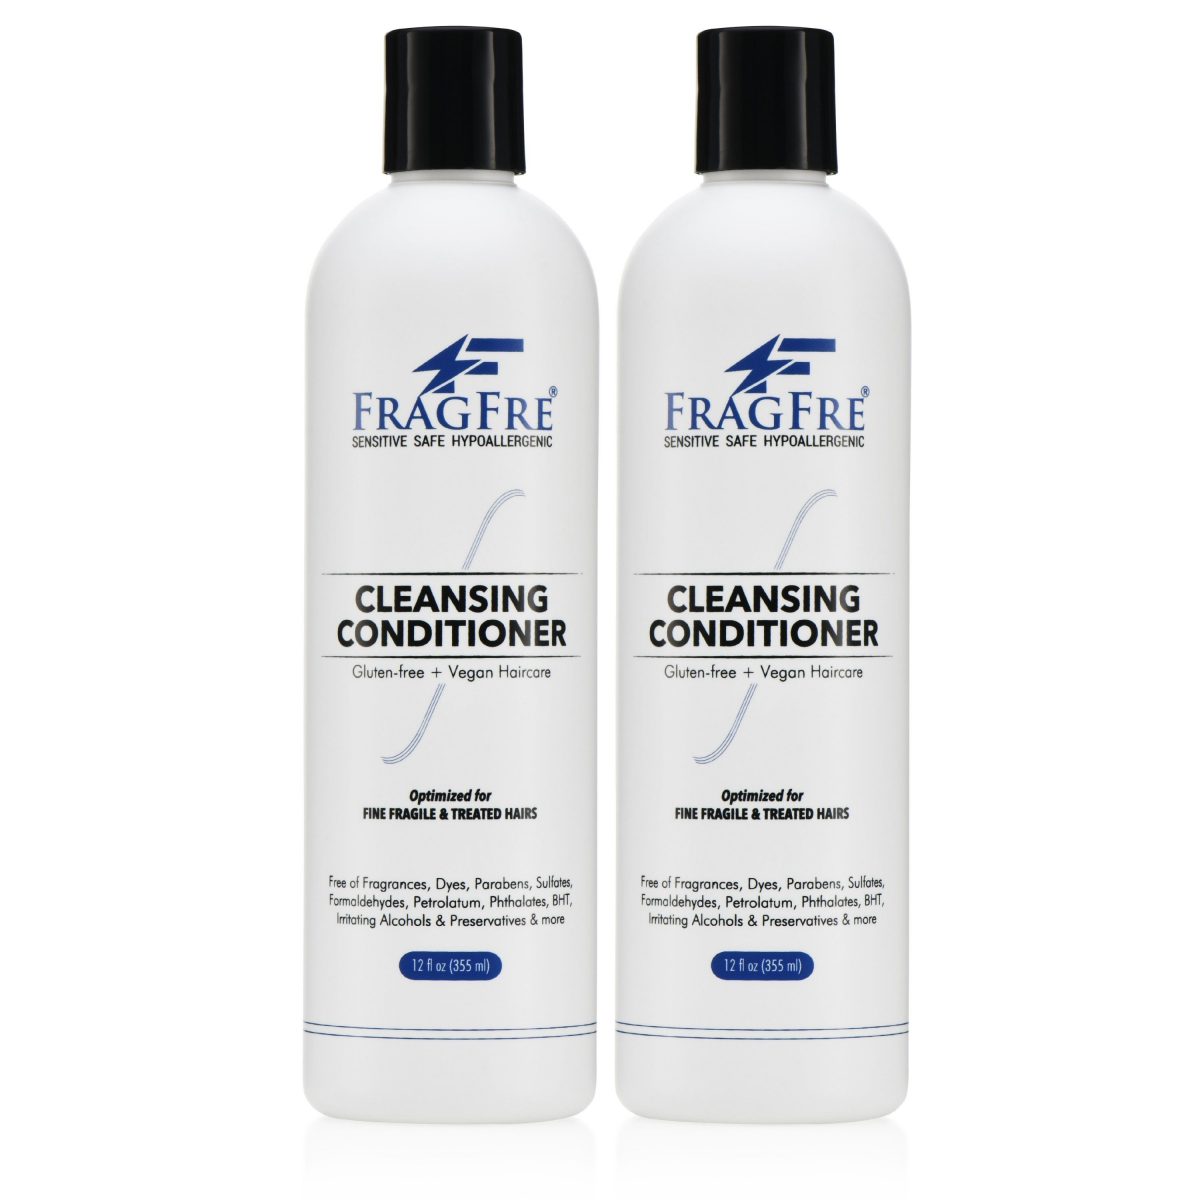 FRAGFRE Cleansing Conditioner for Fine Fragile and Treated Hairs 12 oz ...